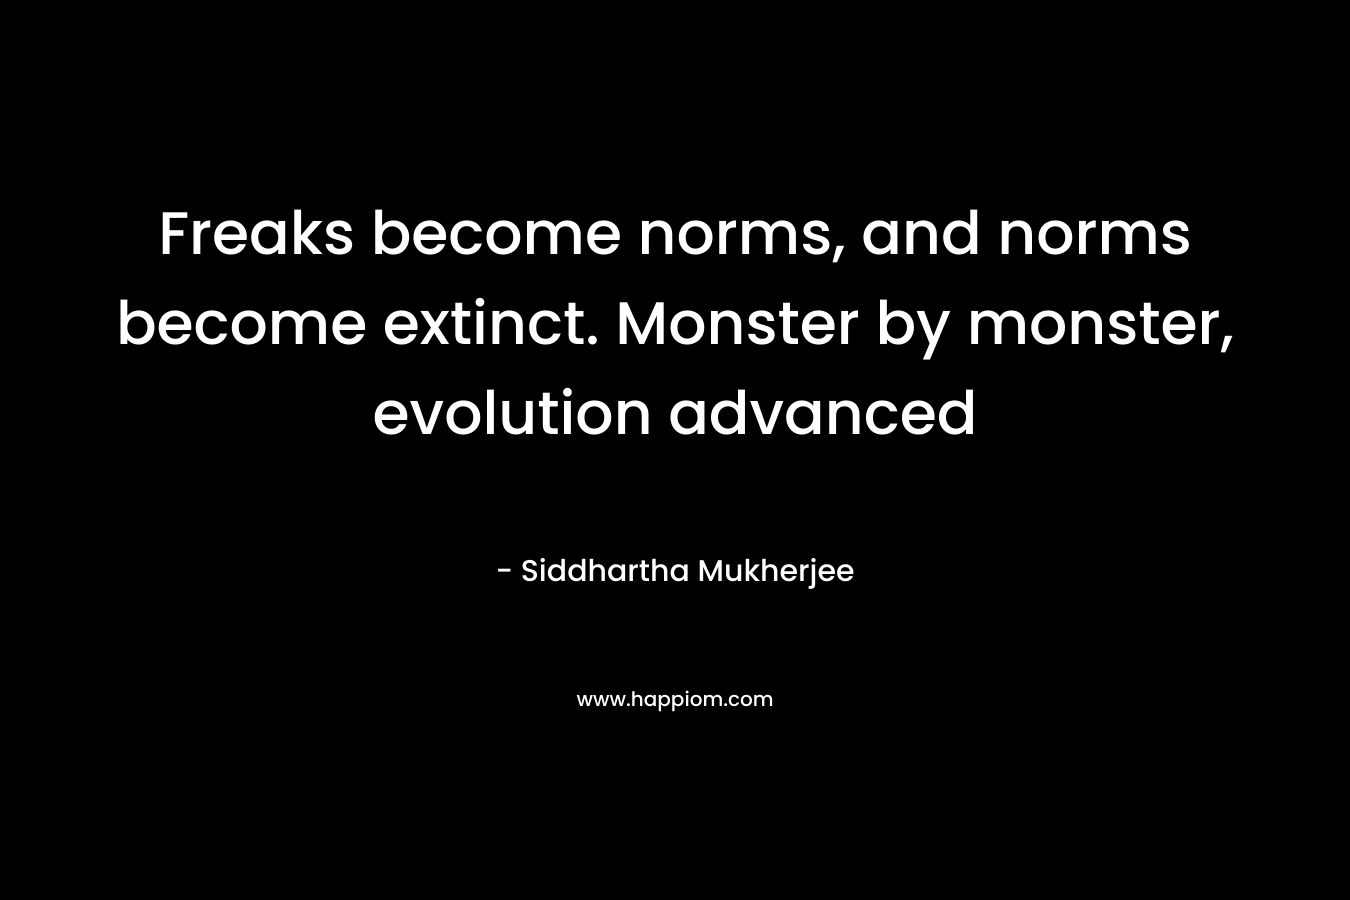 Freaks become norms, and norms become extinct. Monster by monster, evolution advanced